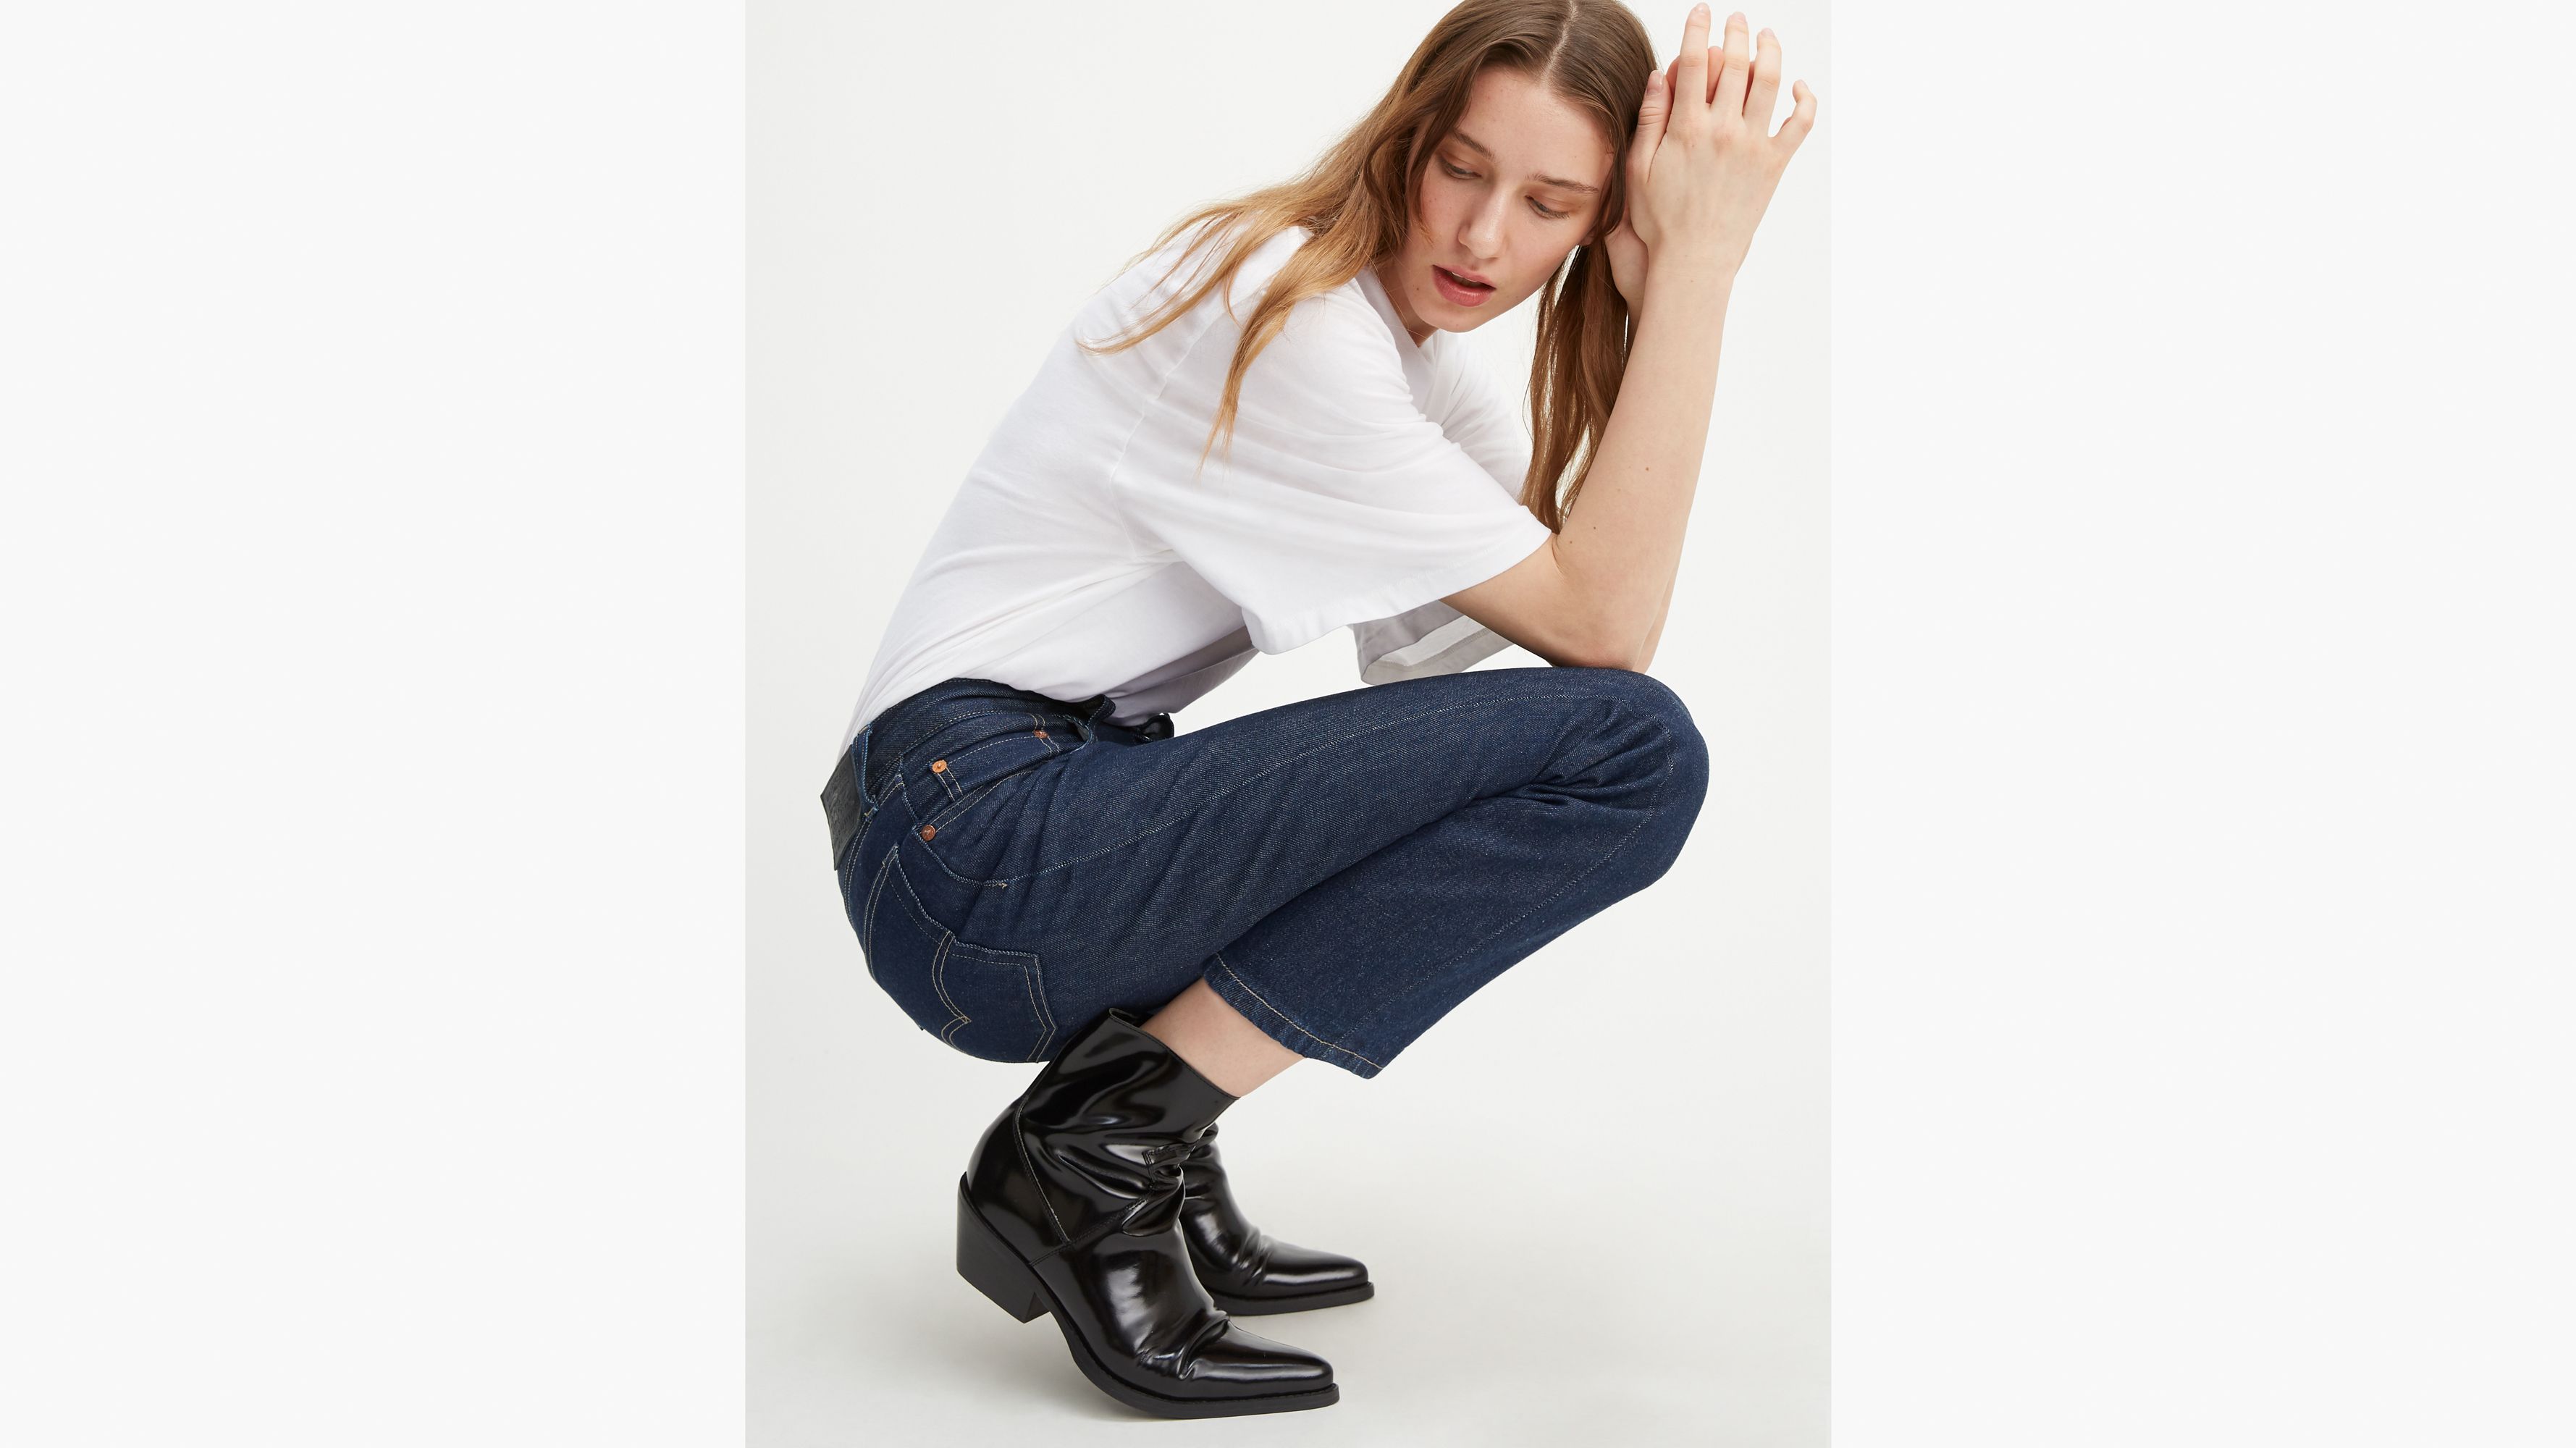 Levi's® Made & Crafted® 501® Crop Jeans - Blue | Levi's® SE